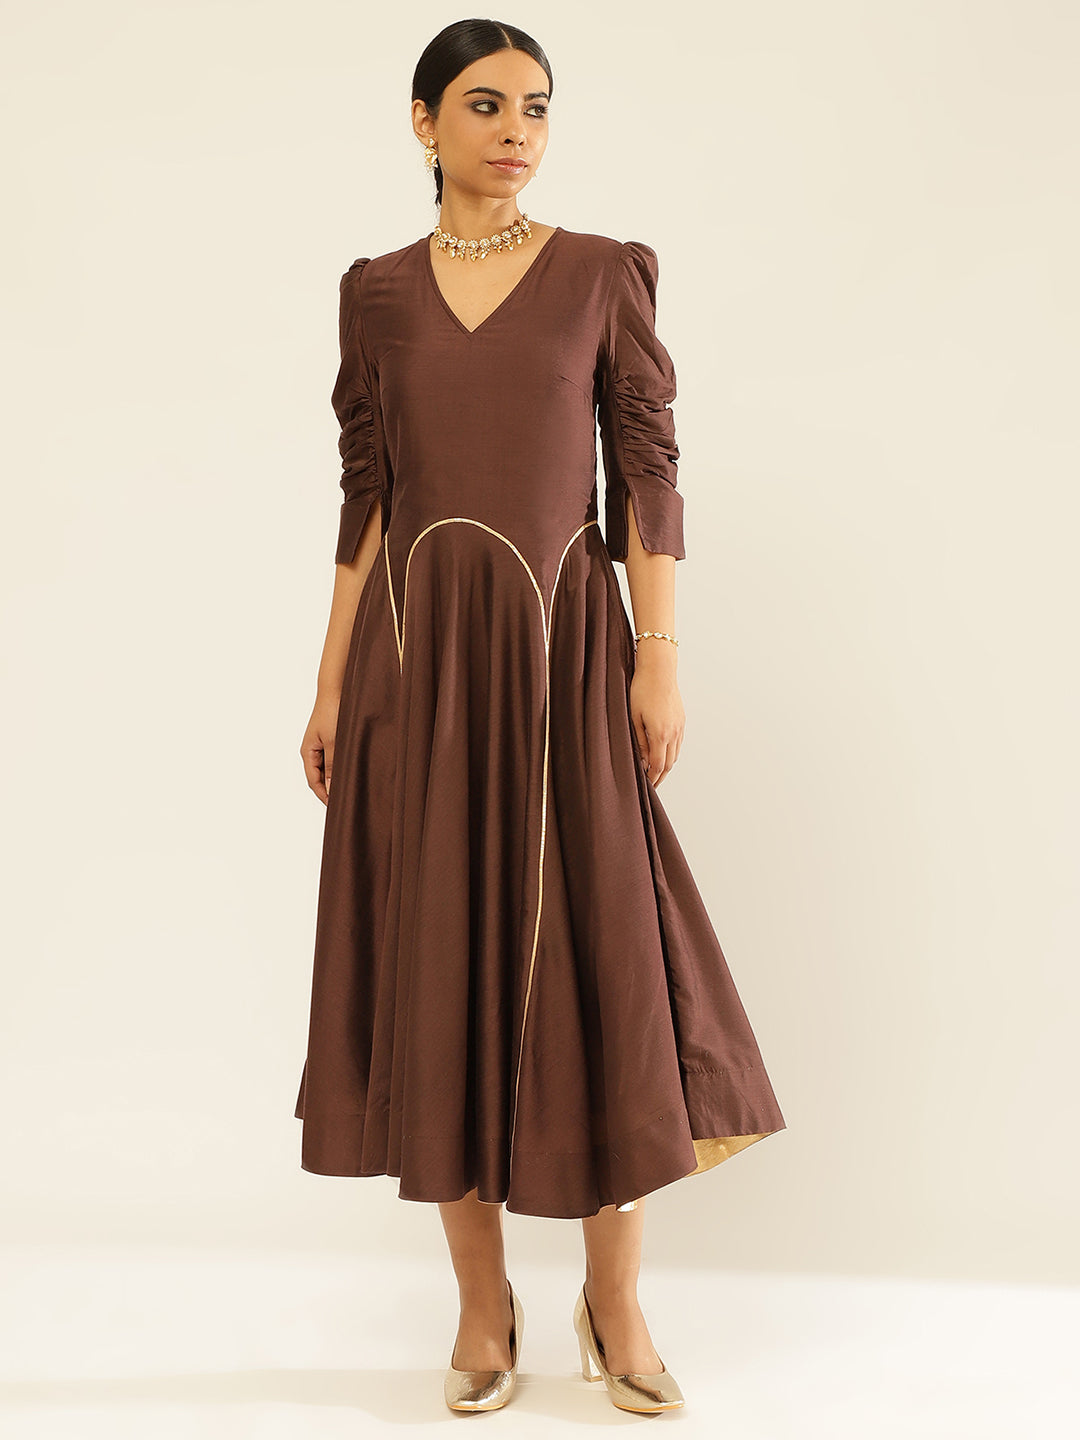 Circular Panelled Dress Highlighted With Gota Patti